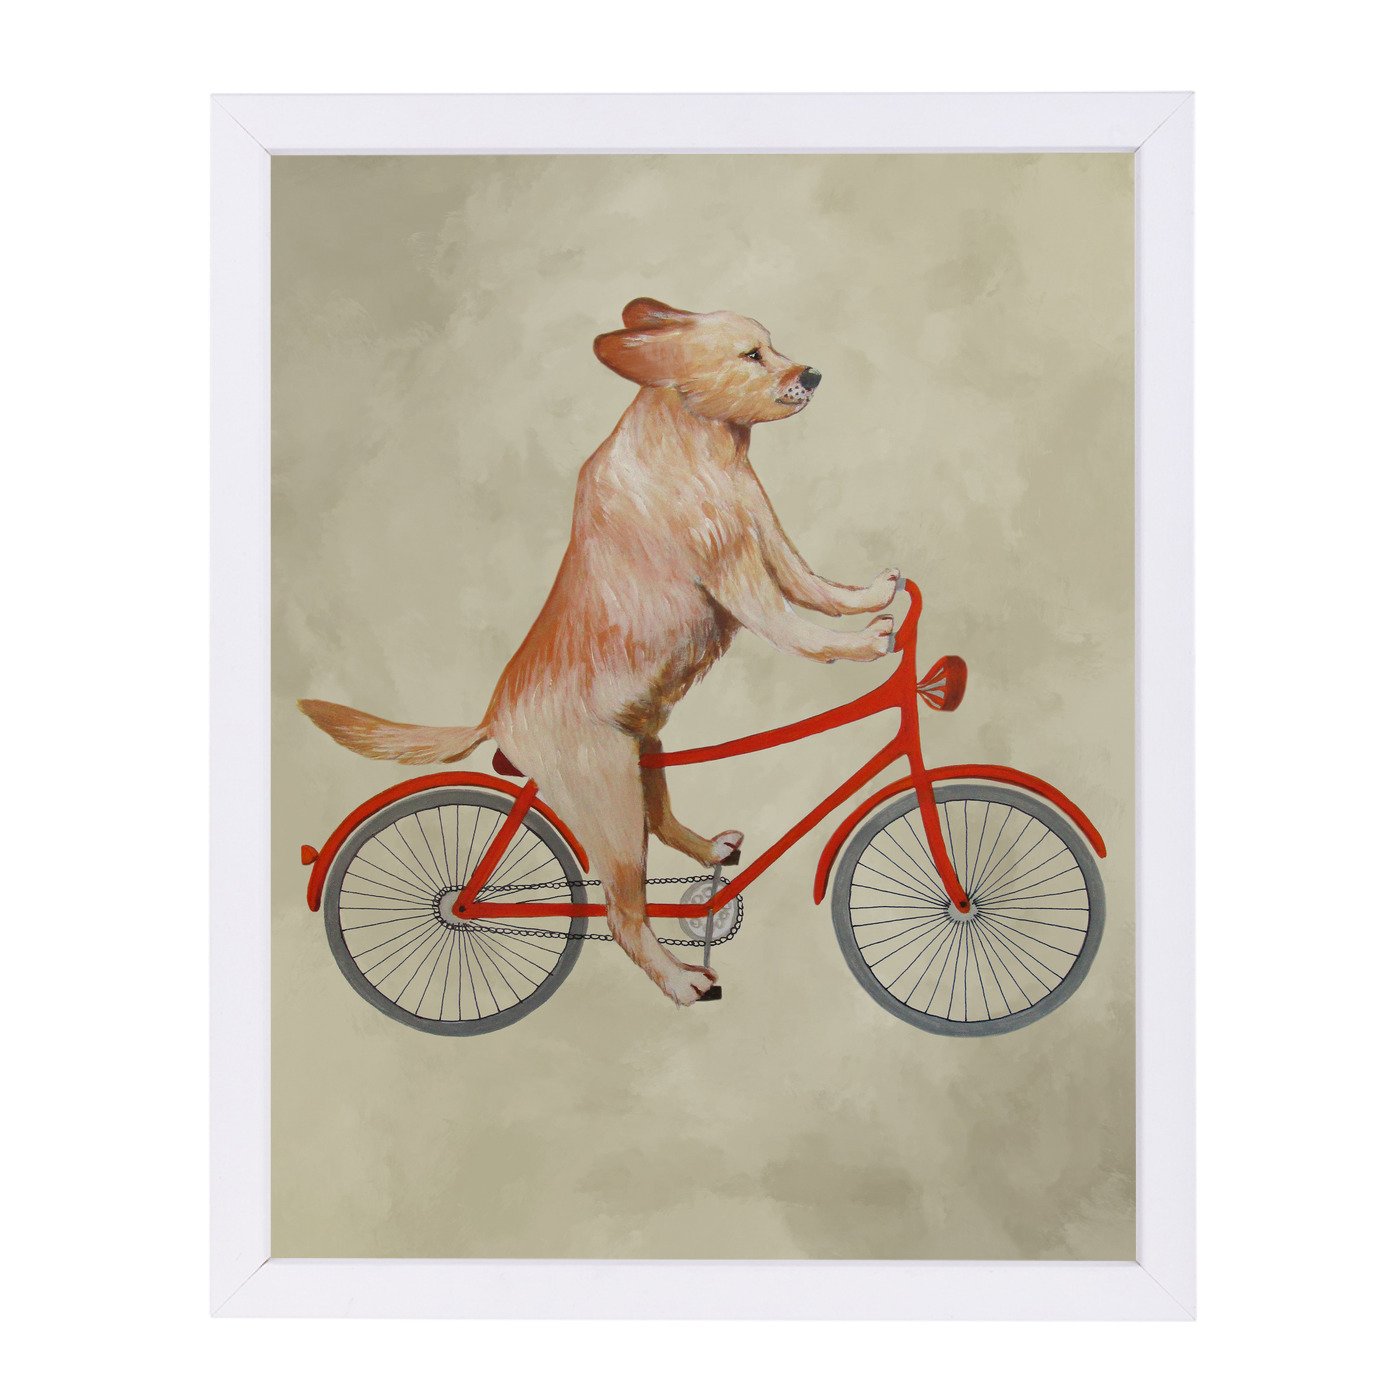 Golden Retriever On Bicycle By Coco De Paris - Framed Print - Americanflat